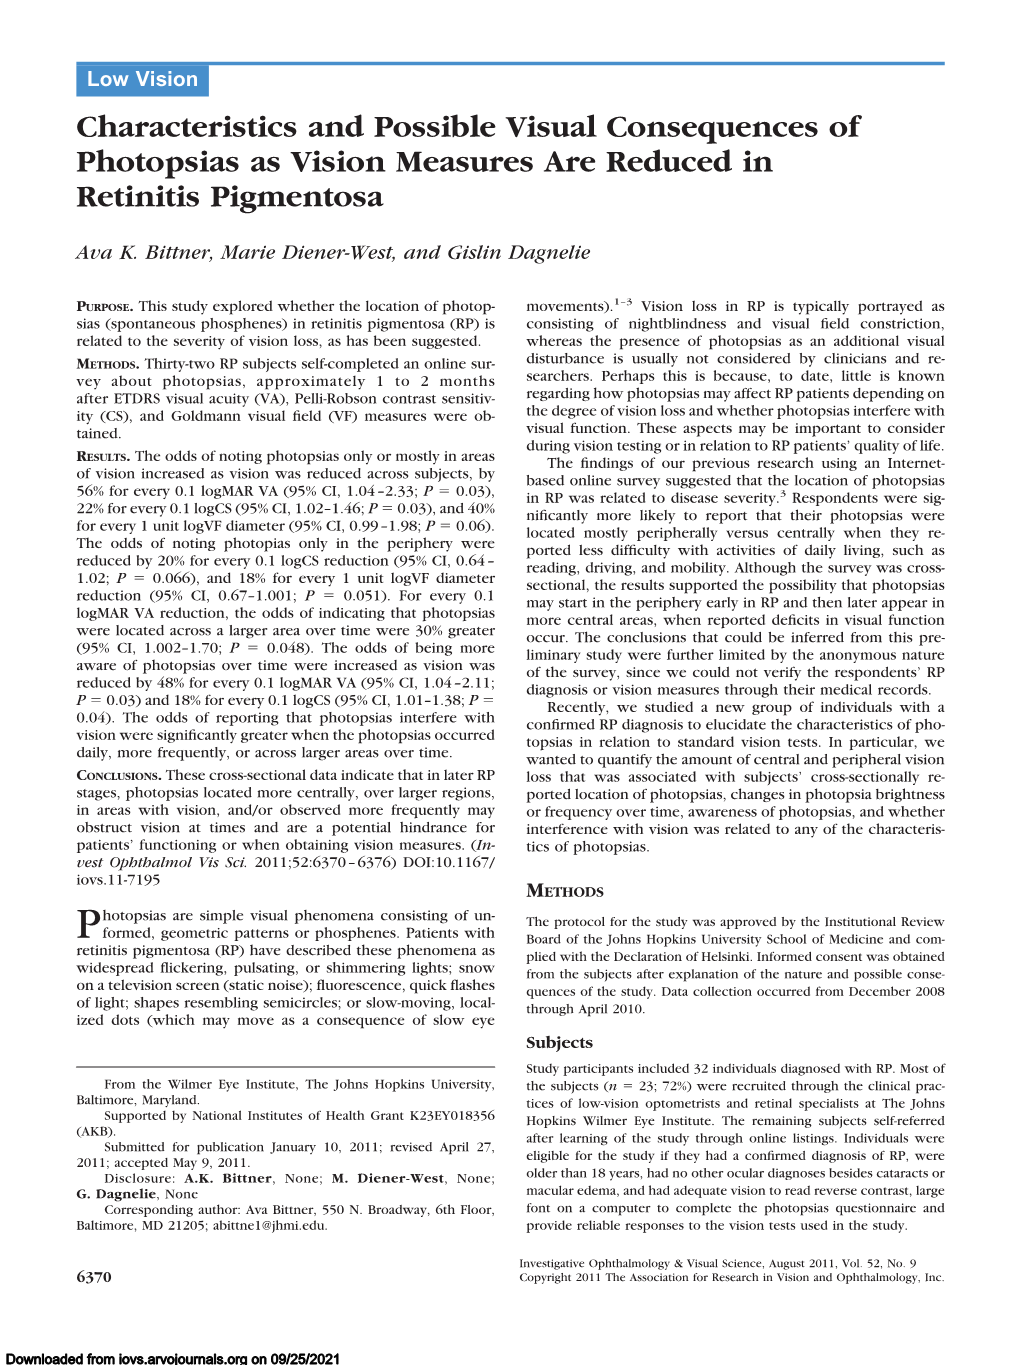 Characteristics and Possible Visual Consequences of Photopsias As Vision Measures Are Reduced in Retinitis Pigmentosa